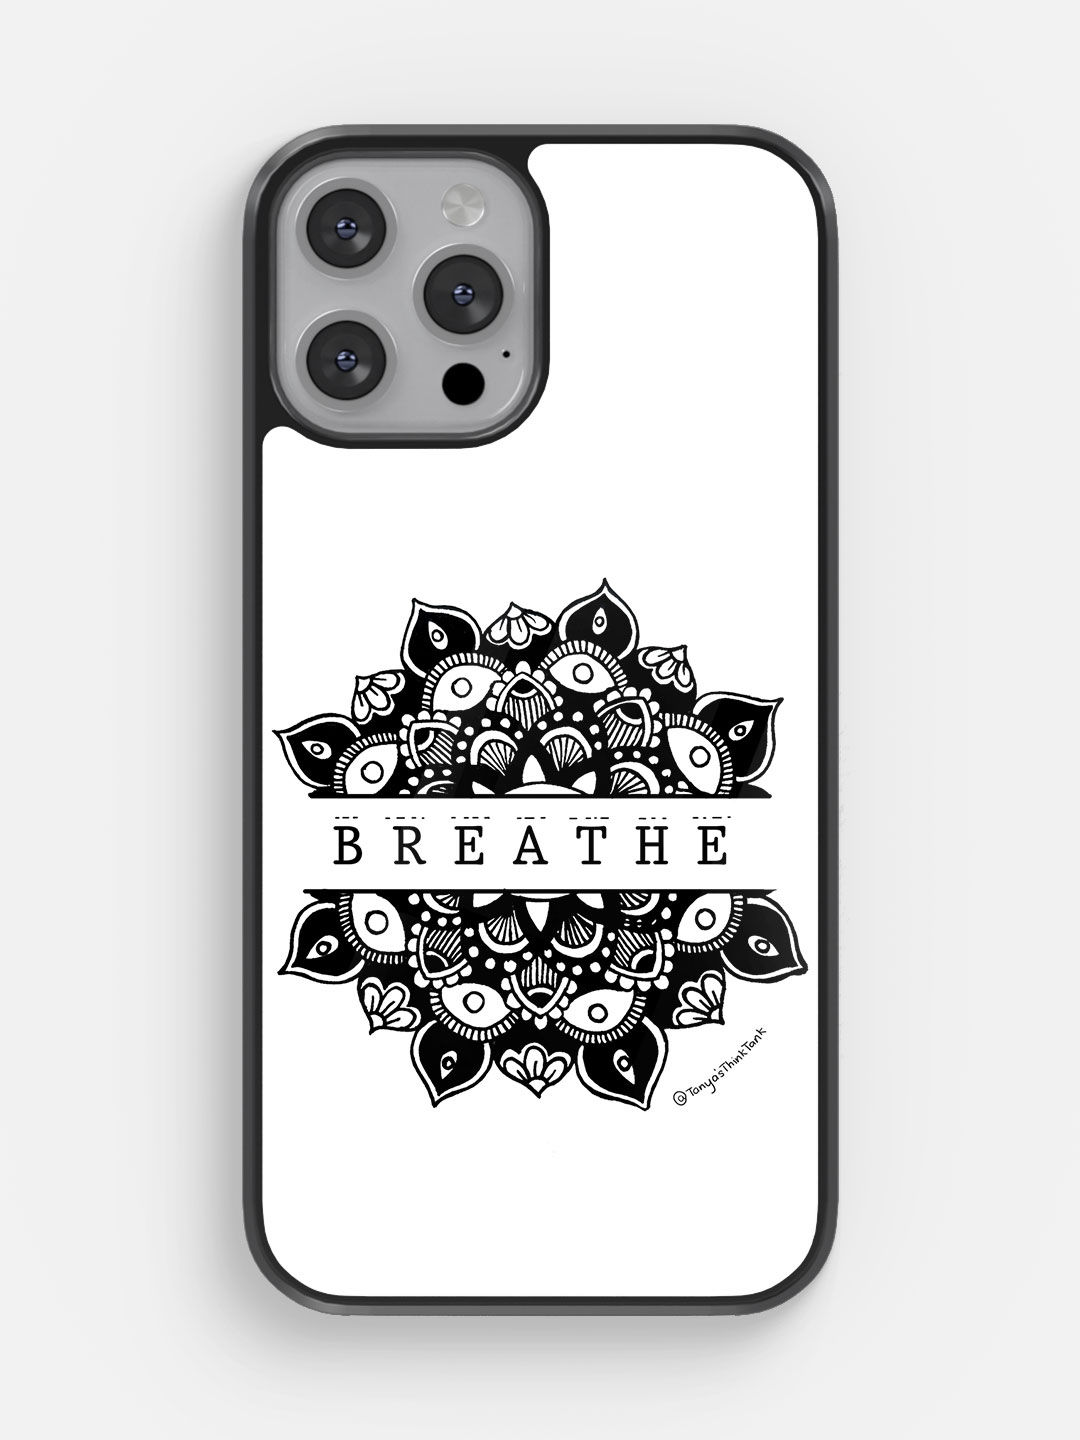 Buy Breathe - Glass Phone Case for iPhone 12 Pro Max Phone Cases & Covers Online